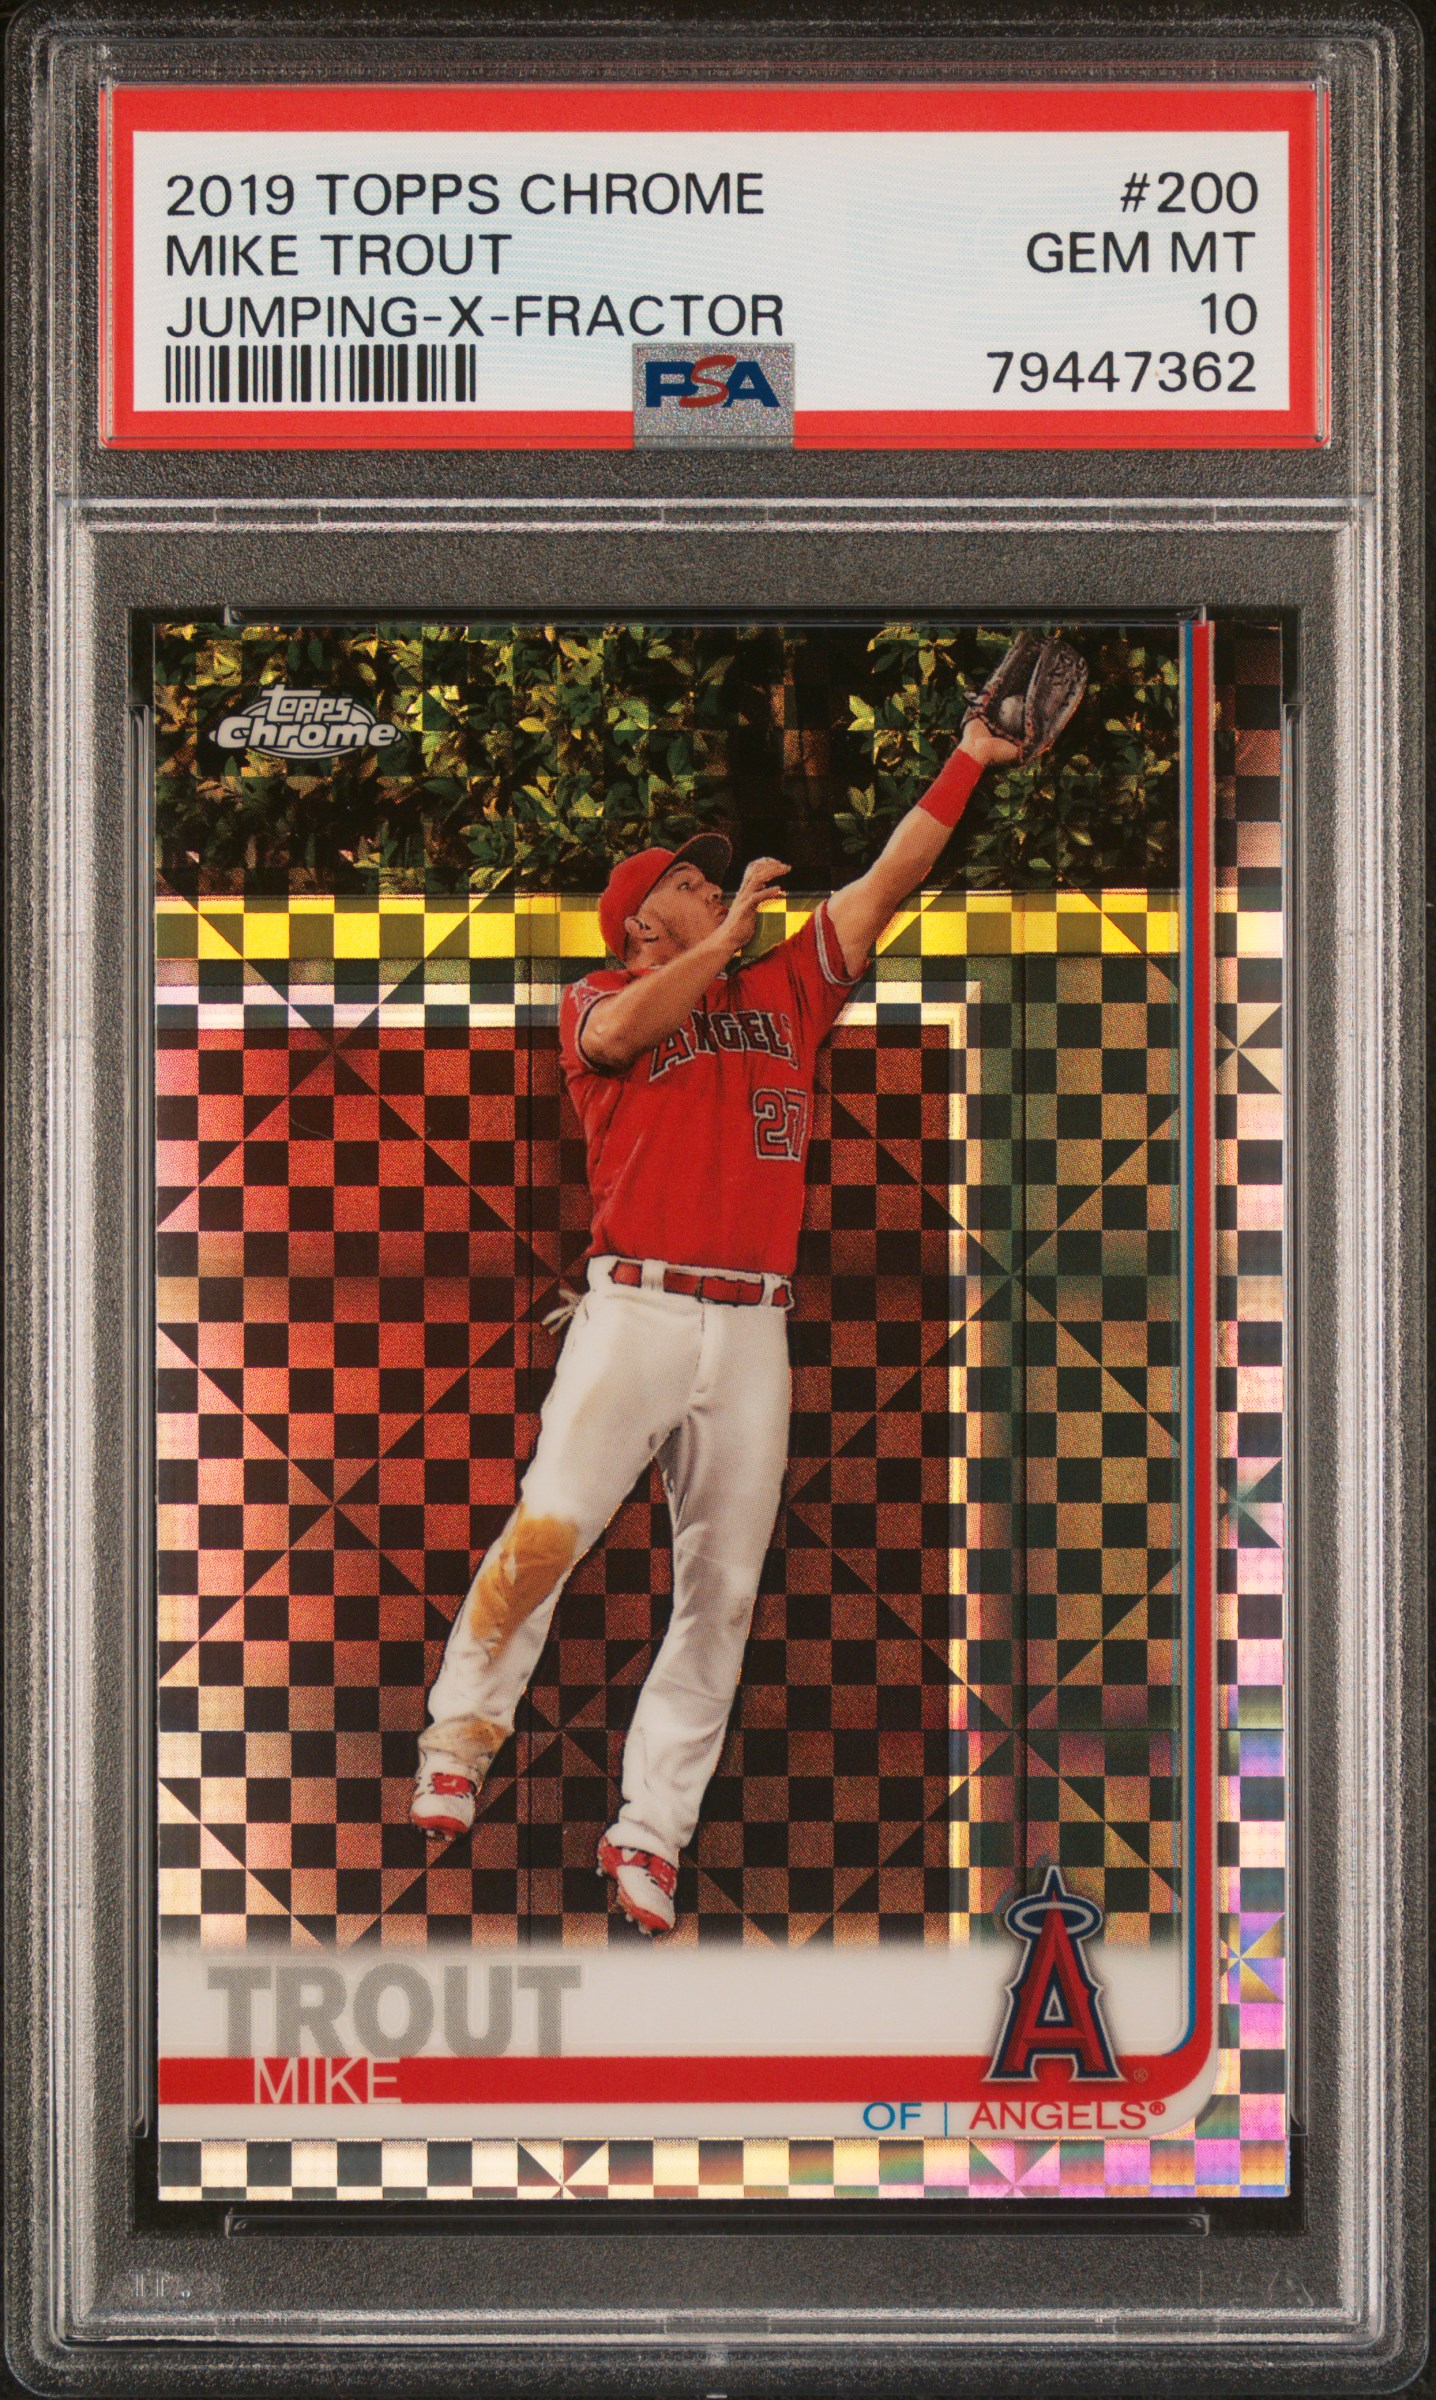 2019 Topps Chrome Jumping-X-Fractor #200 Mike Trout – PSA GEM MT 10